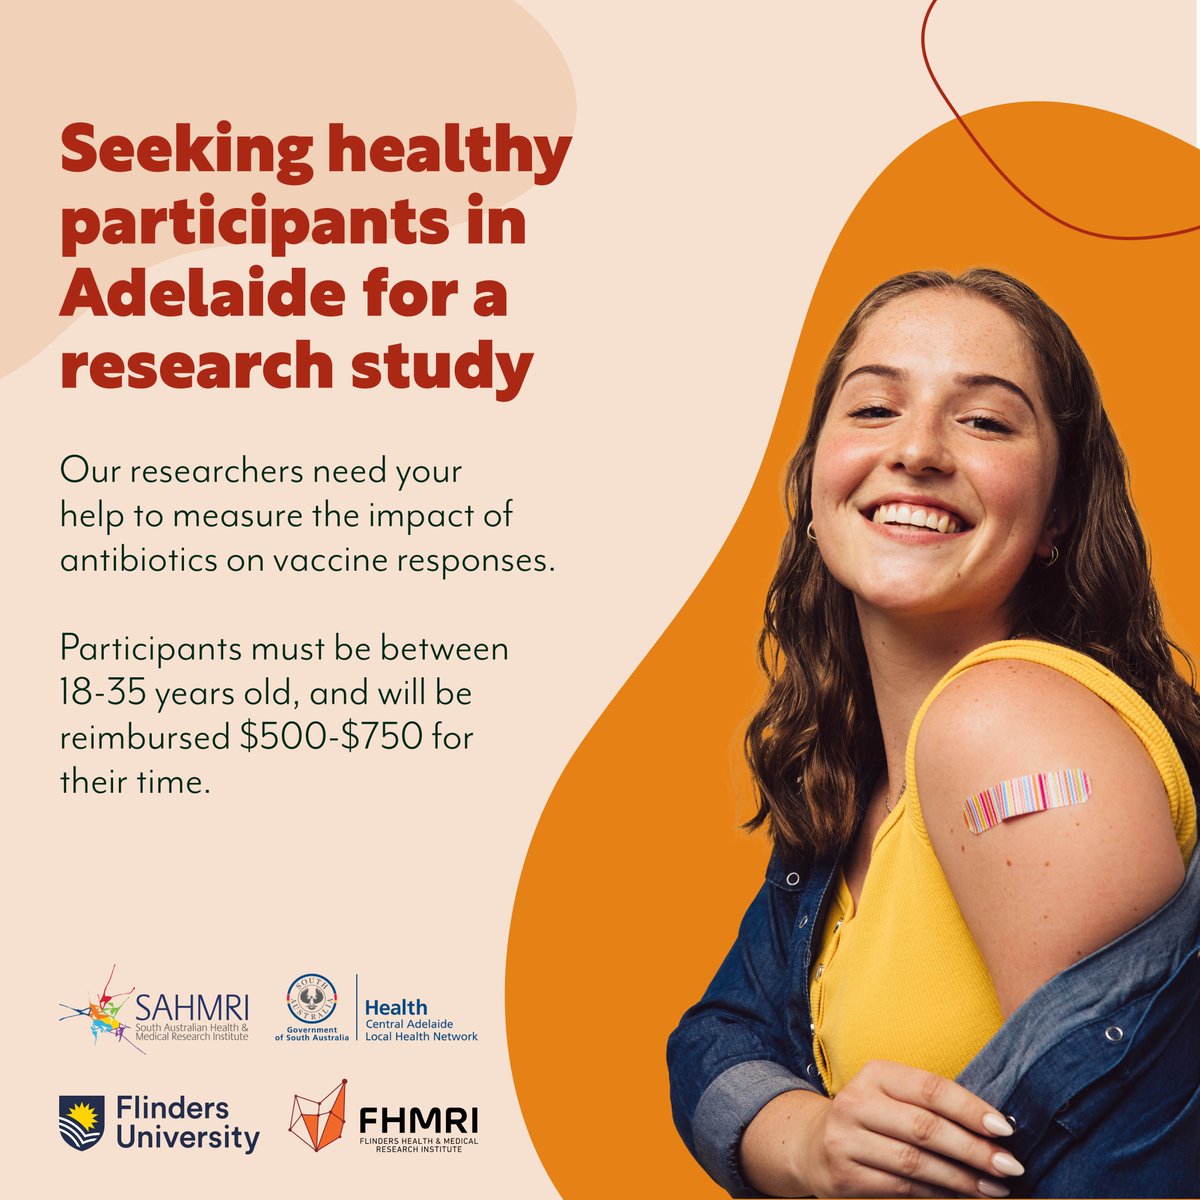 We're looking for healthy, young (18-35yo) participants in Adelaide for our new study! Participants must be willing to take a course of antibiotics 💊 + undergo vaccination 💉and multiple blood draws 🩸+ self-collect stool samples 💩 ➡️Find out more here sahmri.org.au/avirs